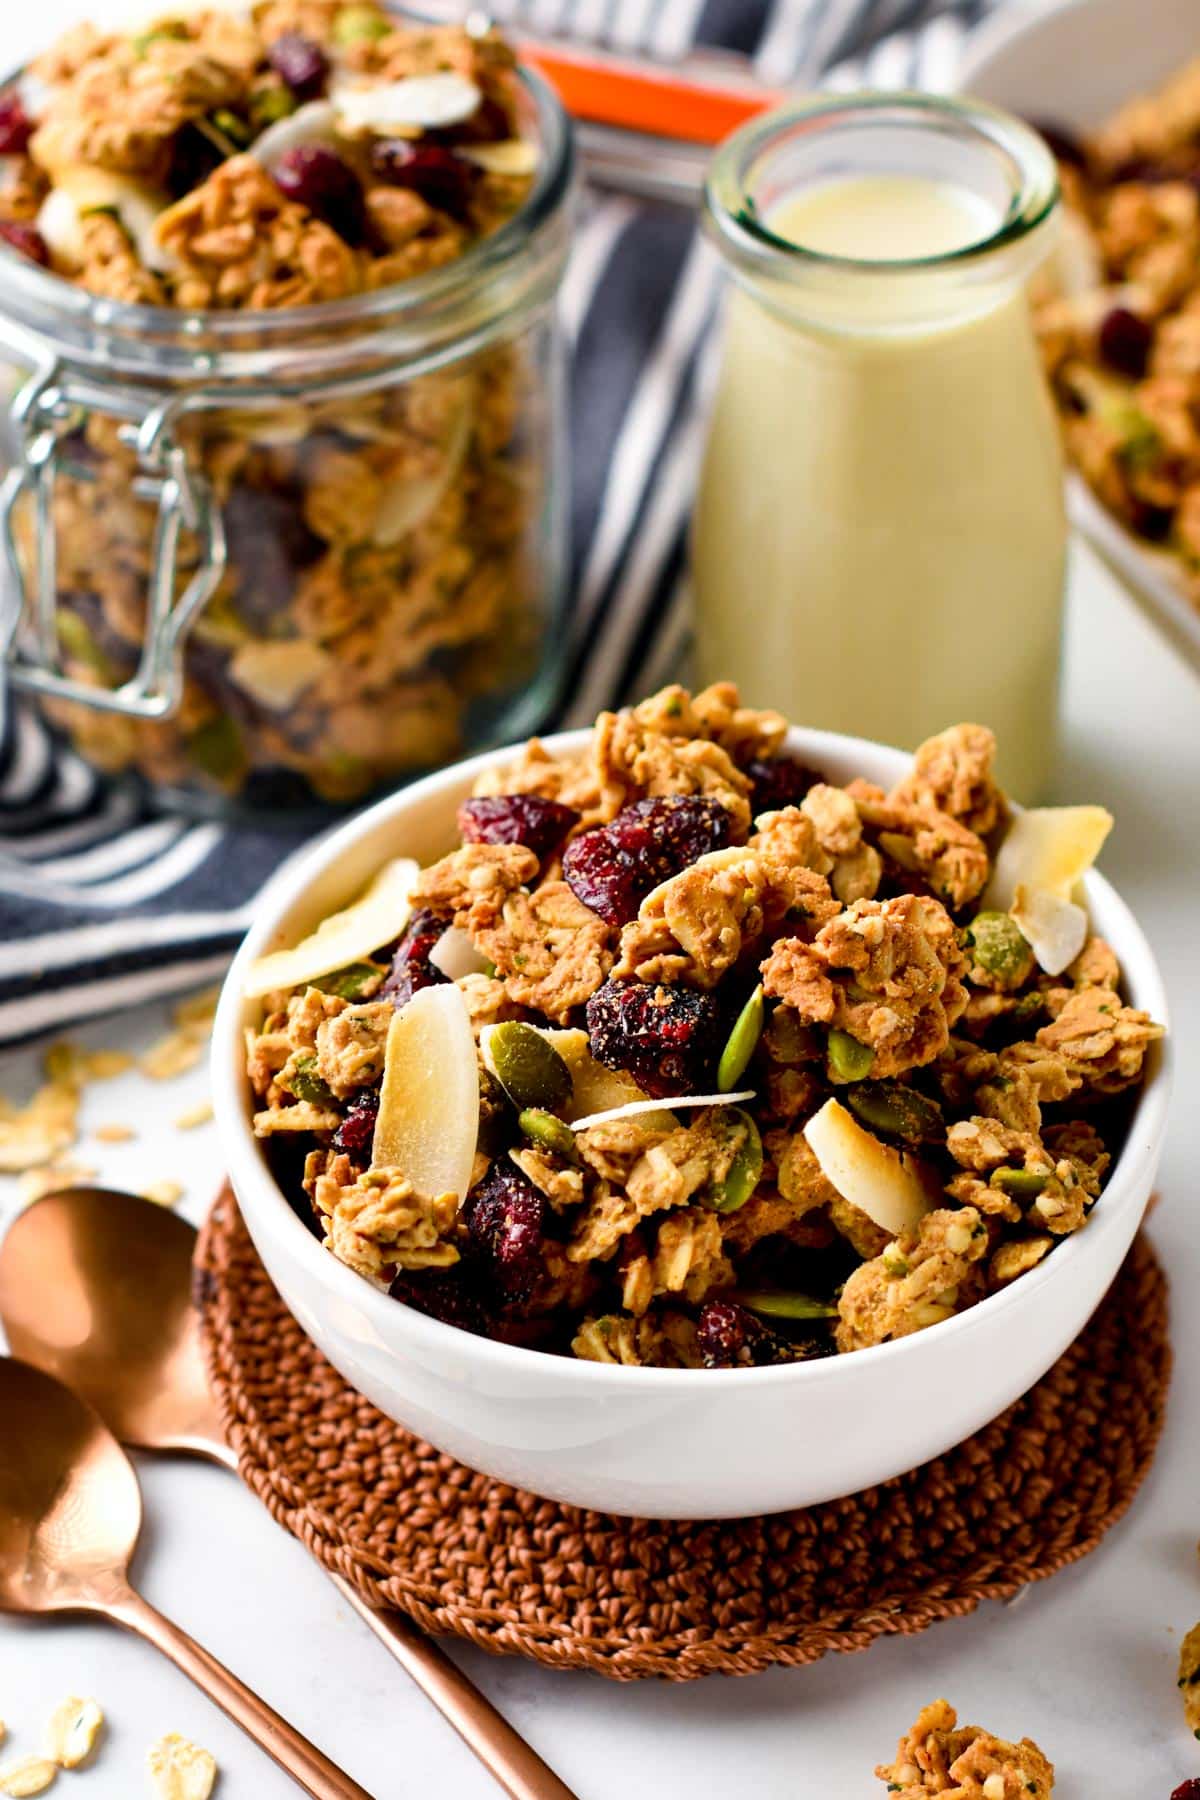 This homemade high protein granola recipe is the most easy high protein breakfast cereal you will ever make! They are crunchy, sweet but also naturally vegan, nut-free and refined sugar-free.This homemade high protein granola recipe is the most easy high protein breakfast cereal you will ever make! They are crunchy, sweet but also naturally vegan, nut-free and refined sugar-free.